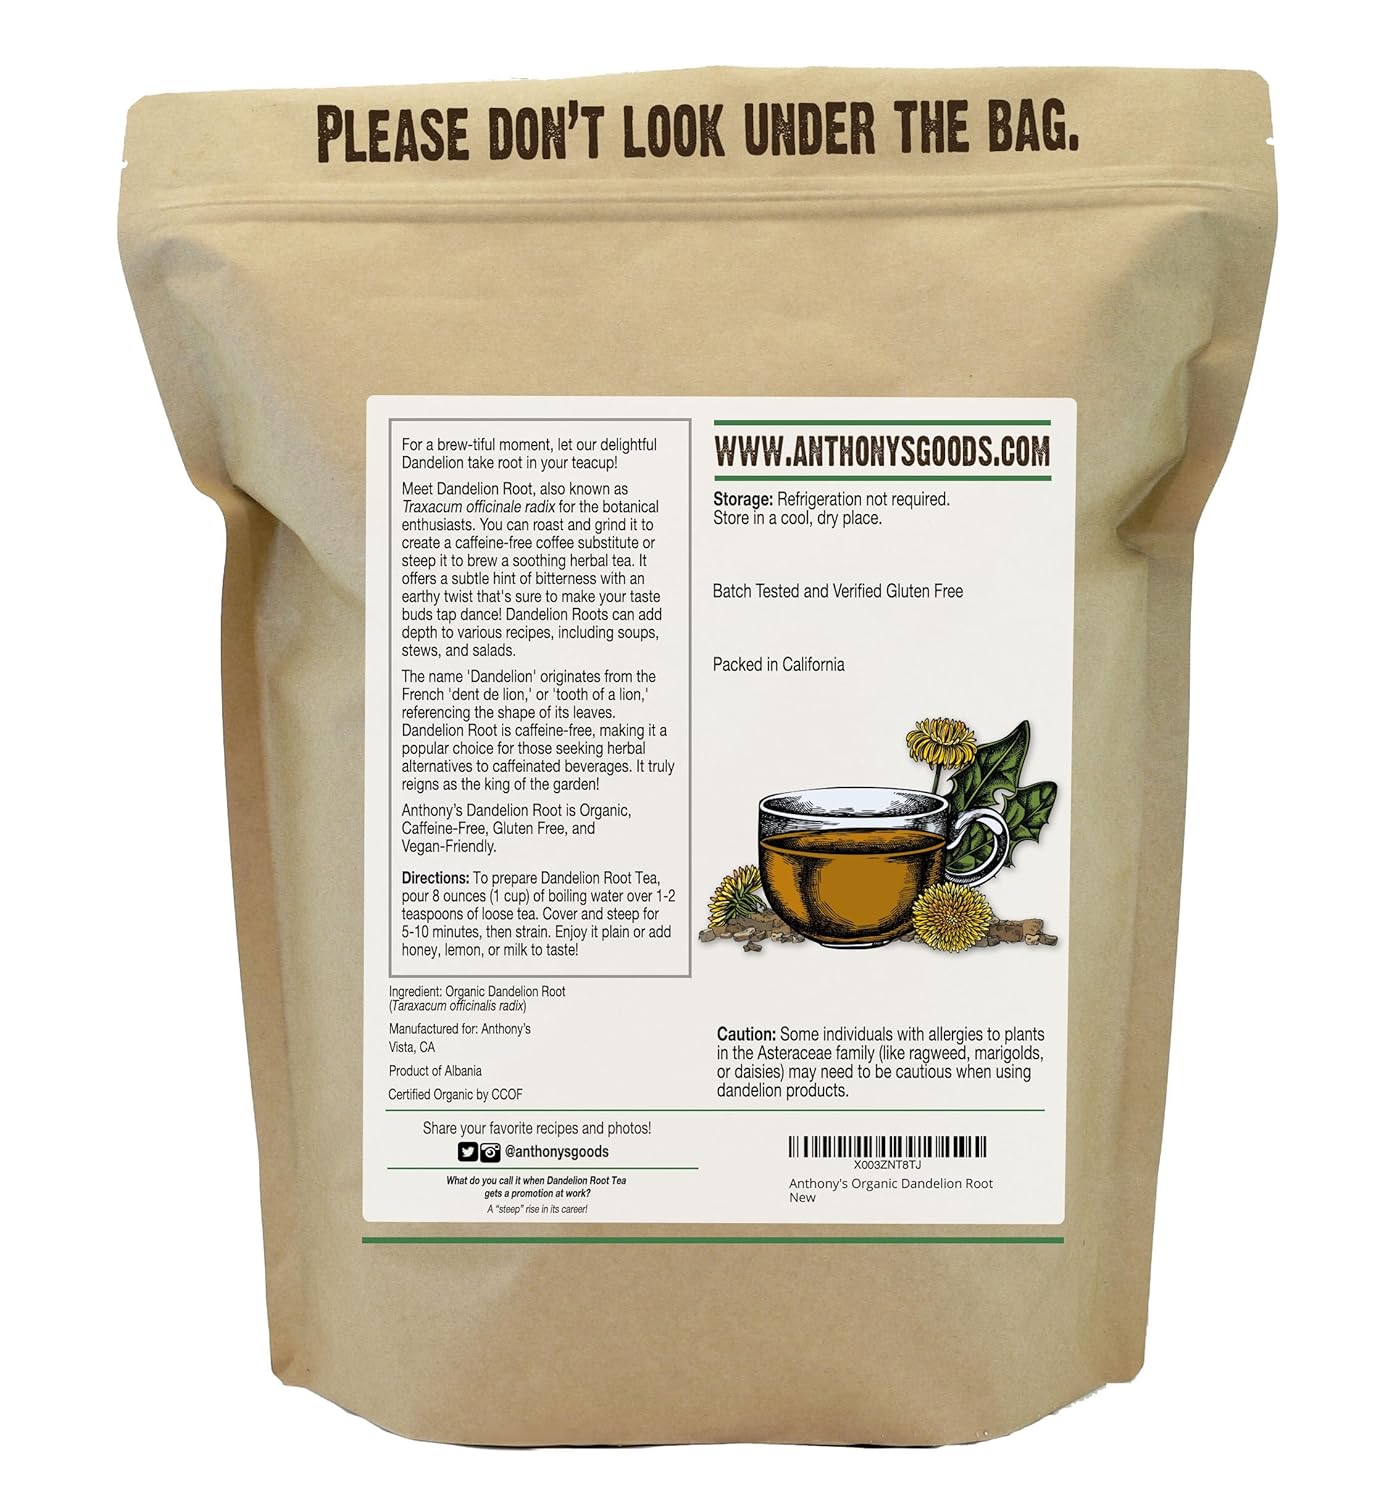 Anthony's Organic Dandelion Root, 1lb, Gluten Free, Non GMO, Cut & Sifted